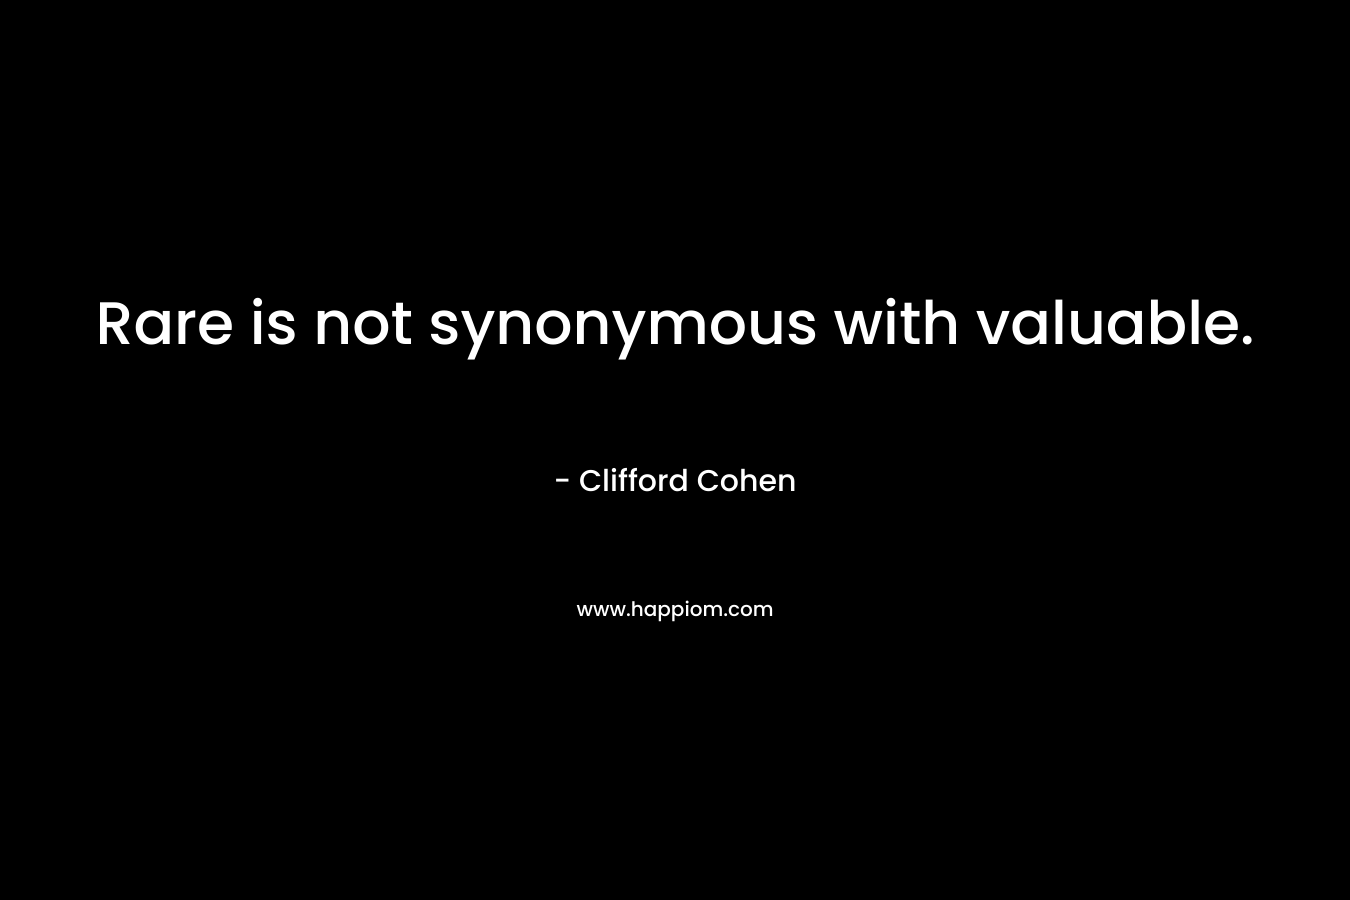 Rare is not synonymous with valuable. – Clifford Cohen